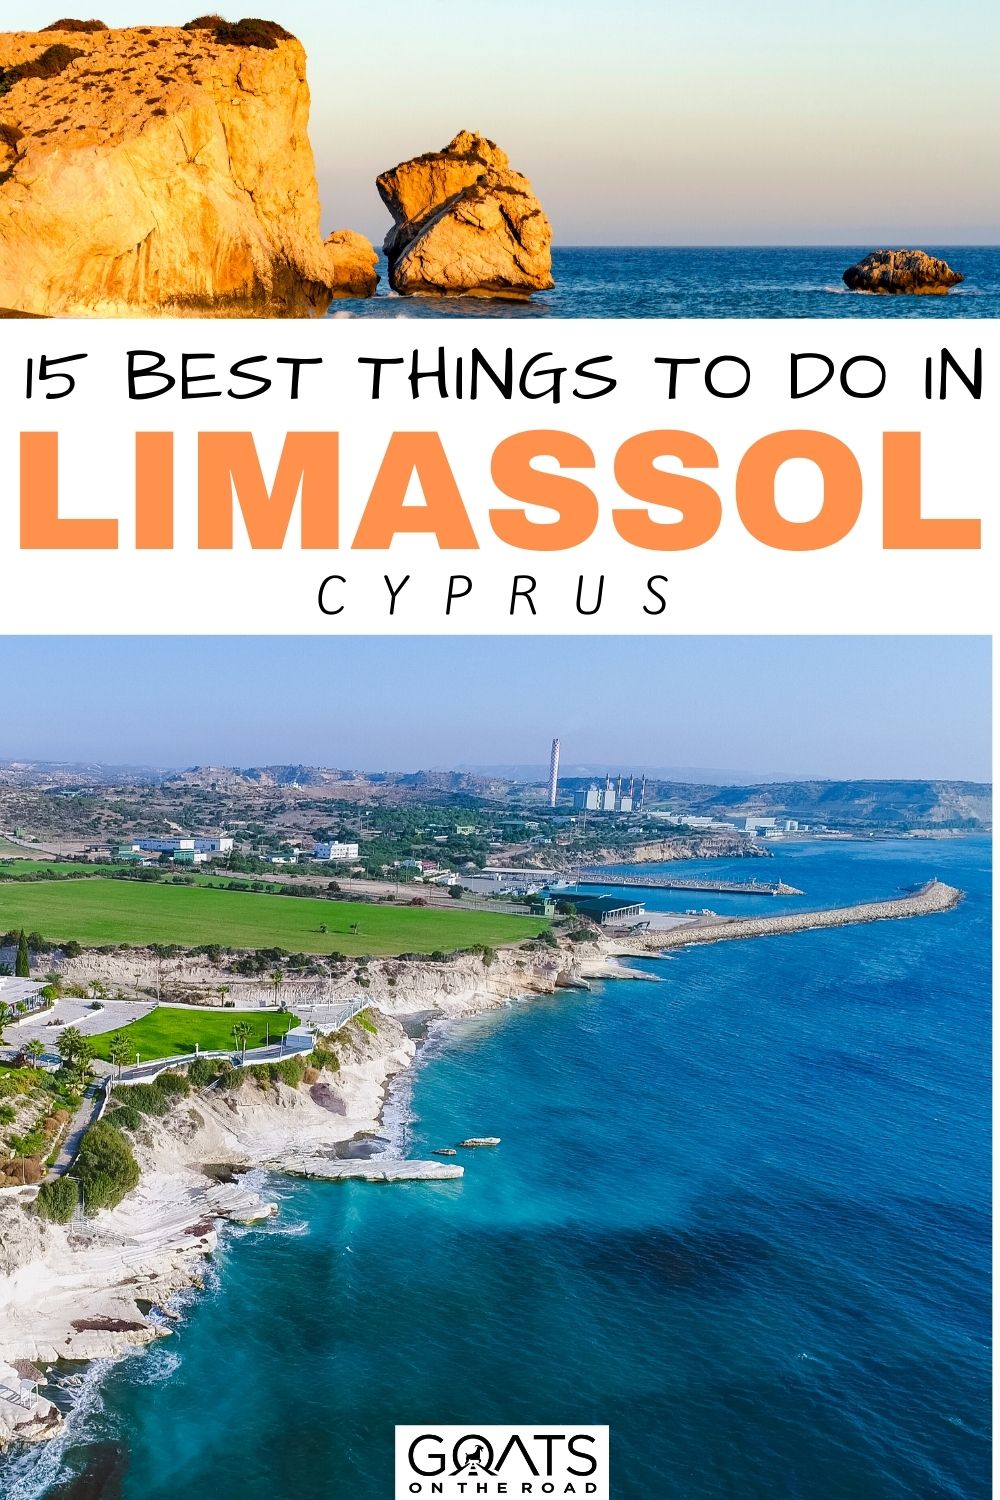 “15 Best Things To Do in Limassol, Cyprus